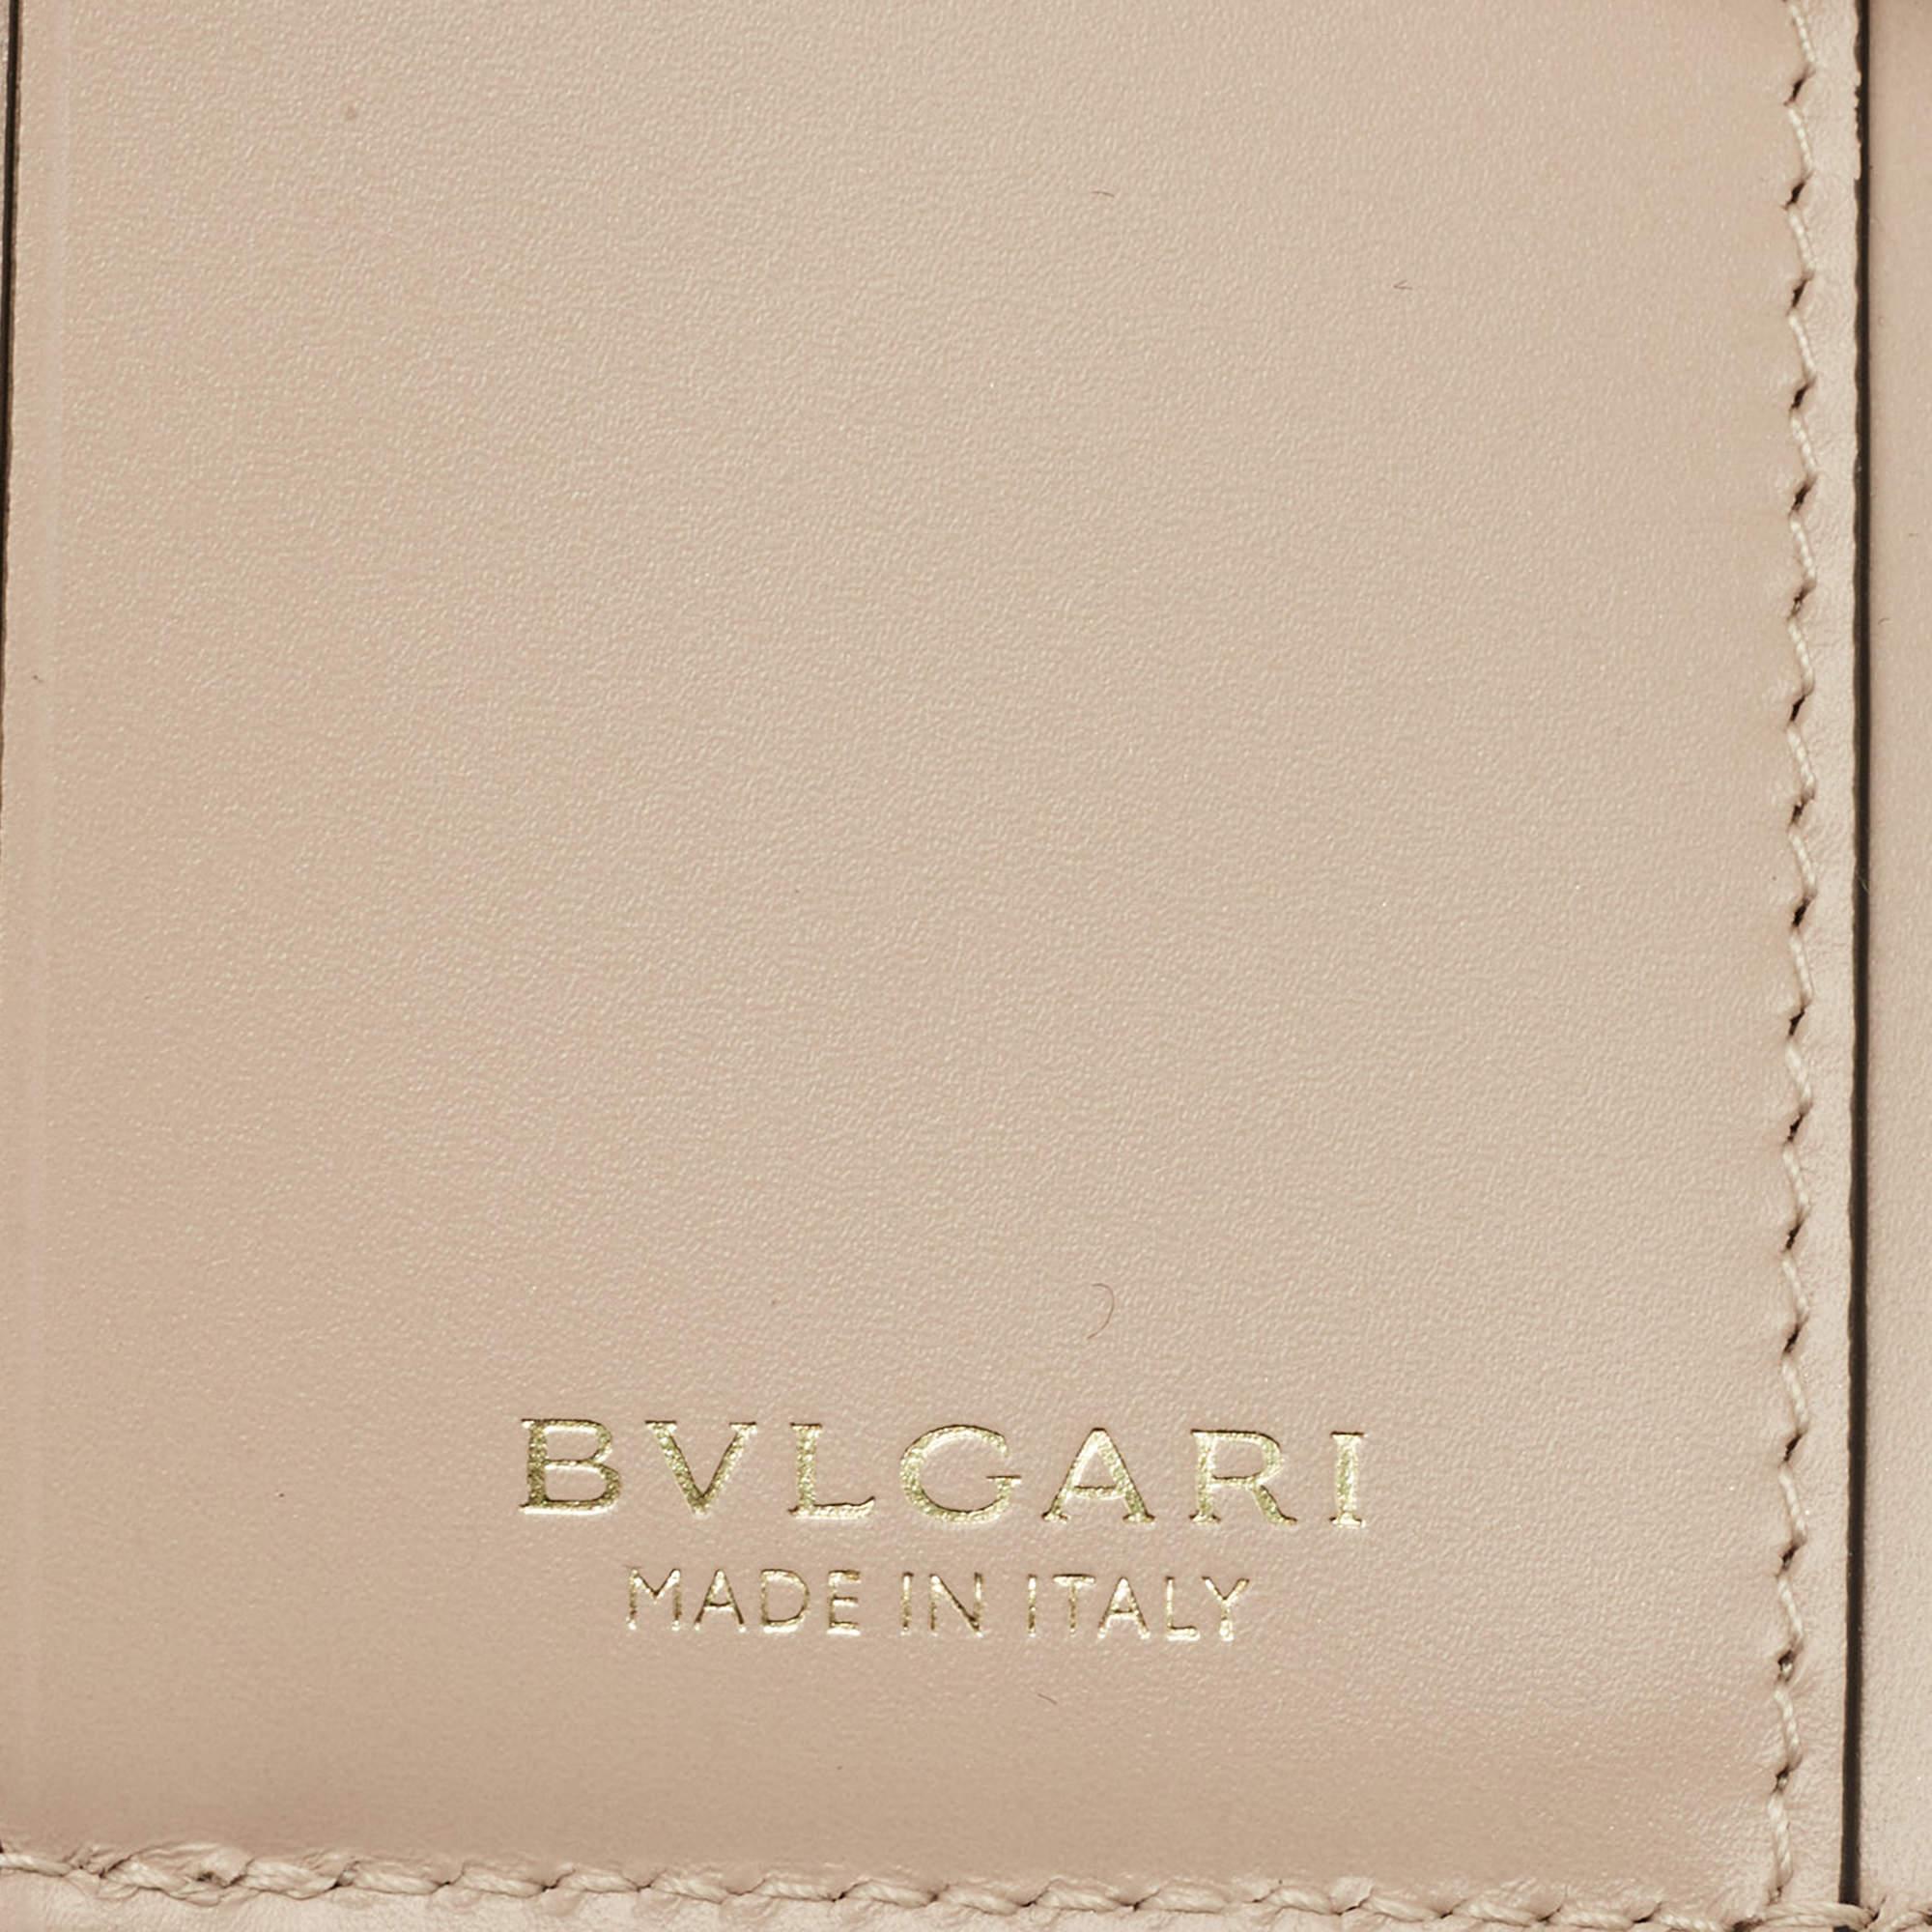 Bvlgari Gold Karung Leather Serpenti Forever Trifold Wallet 2